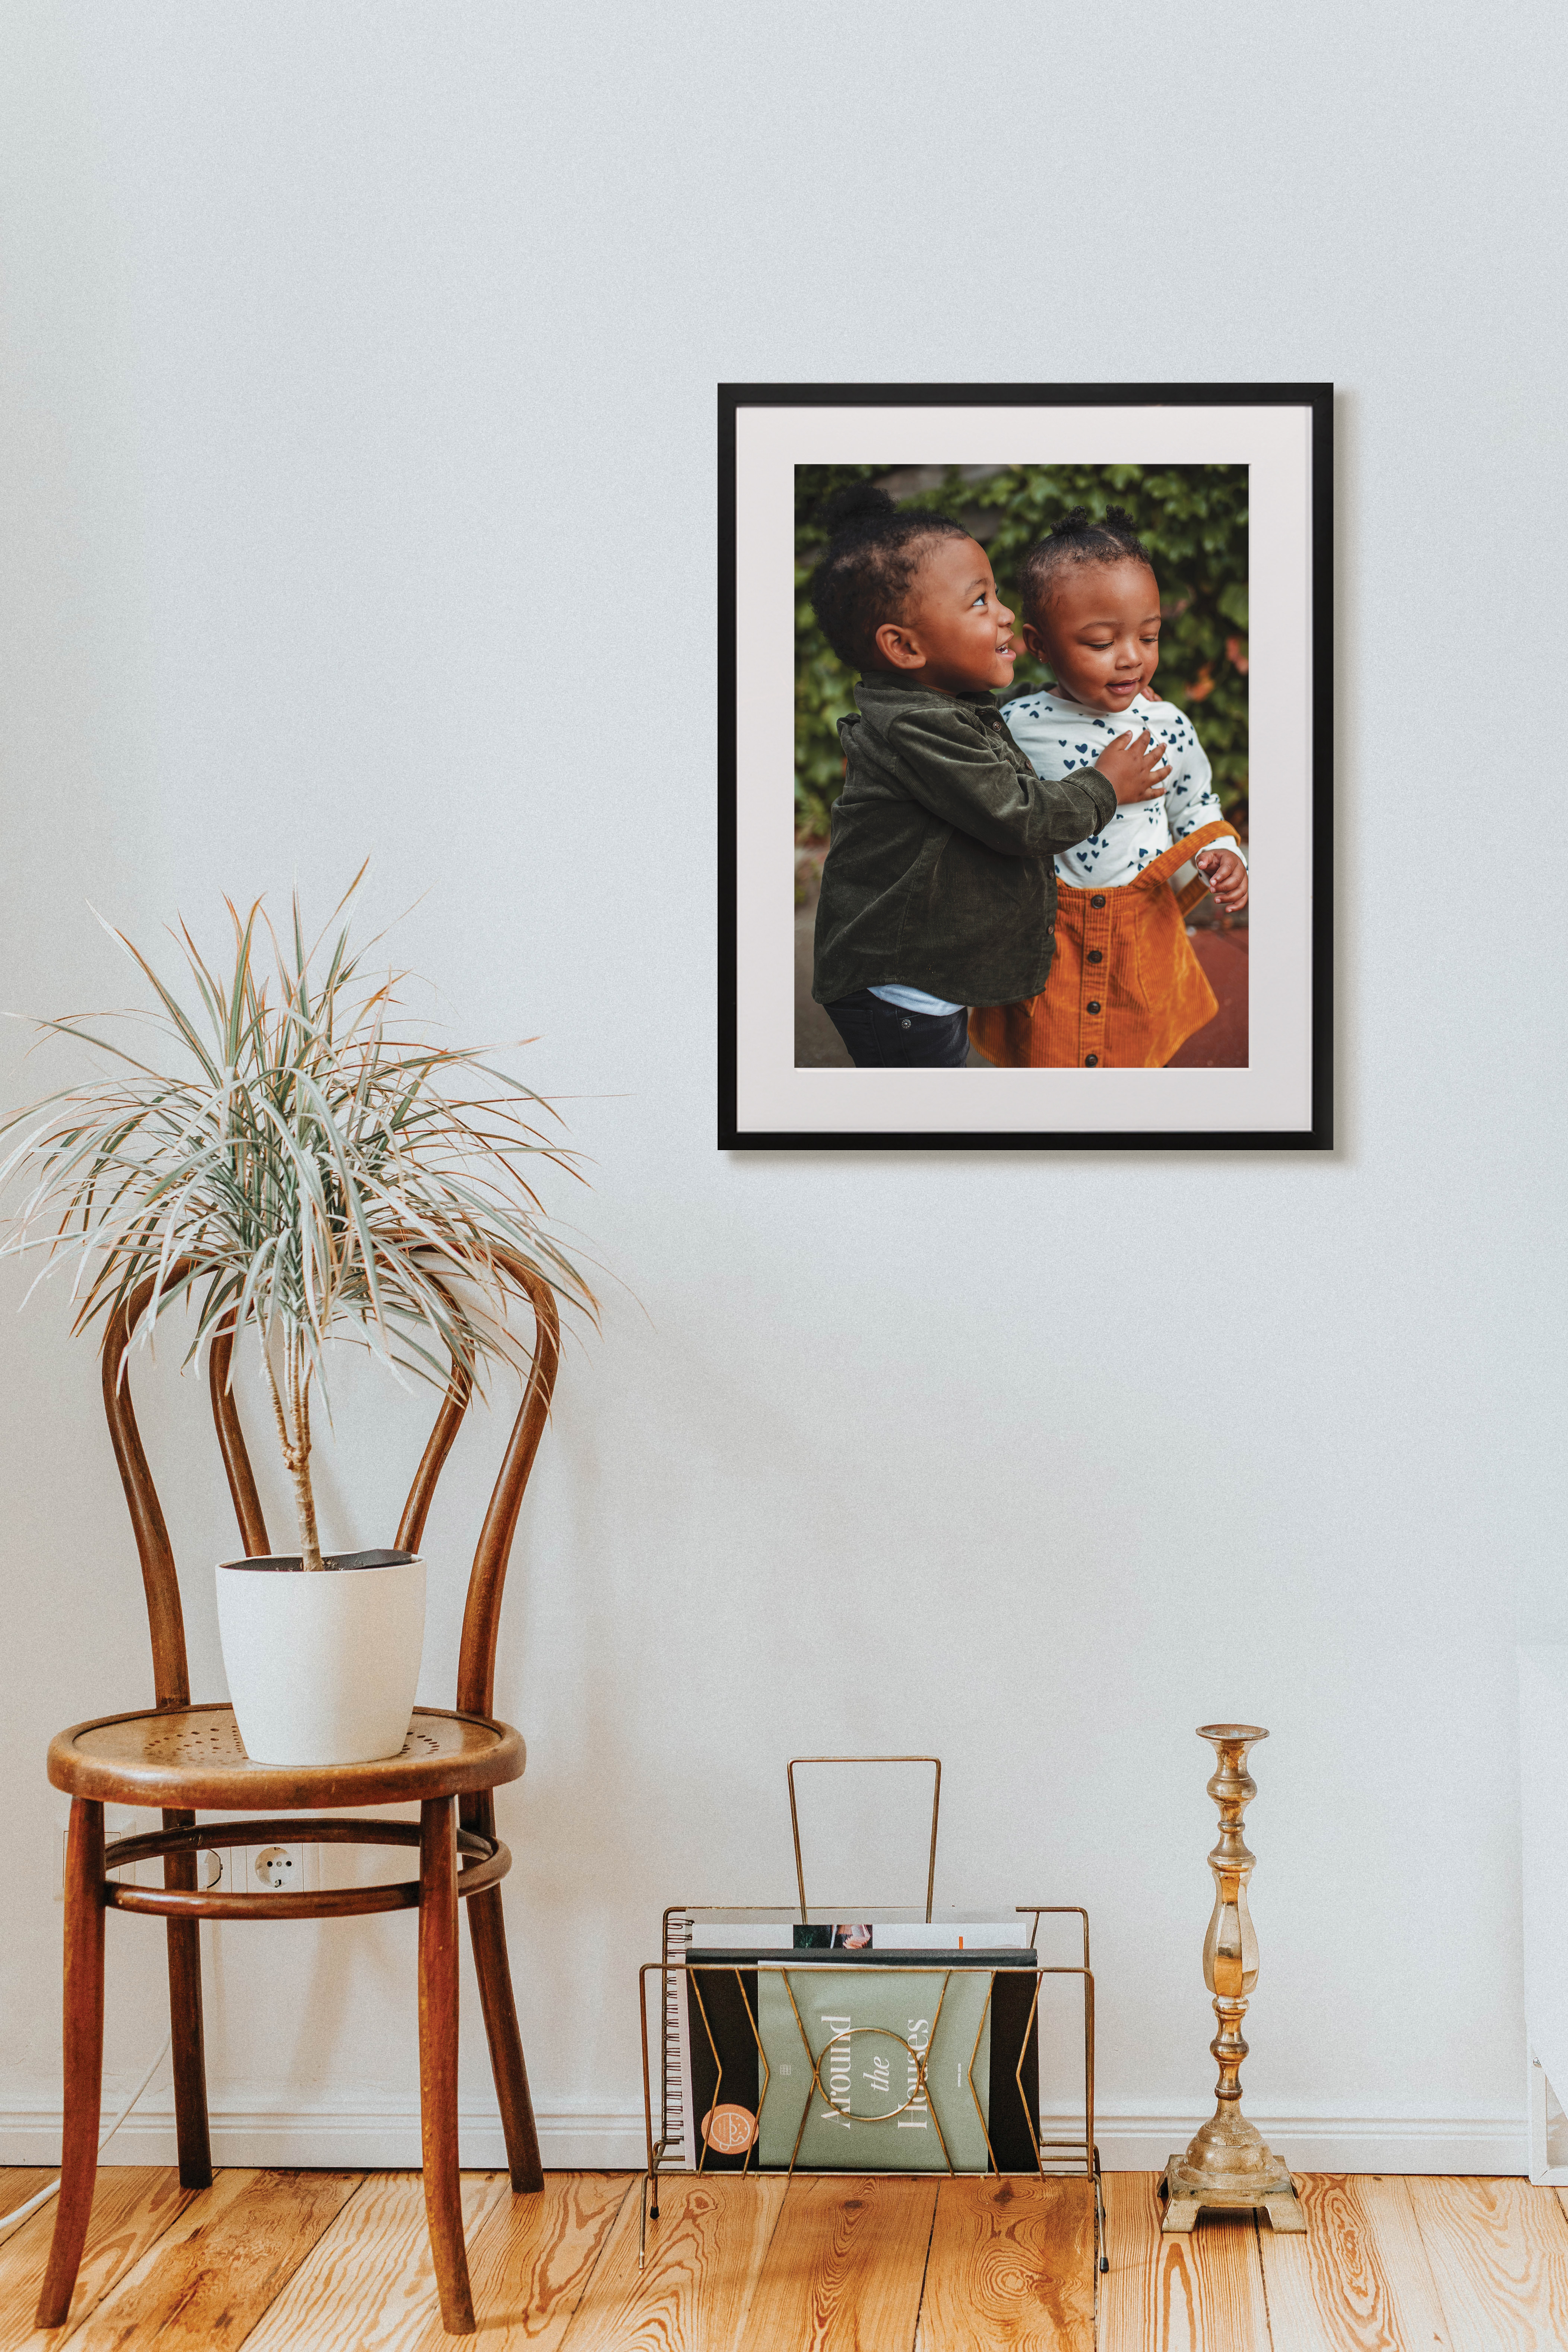 Framed print in living room of two children playing